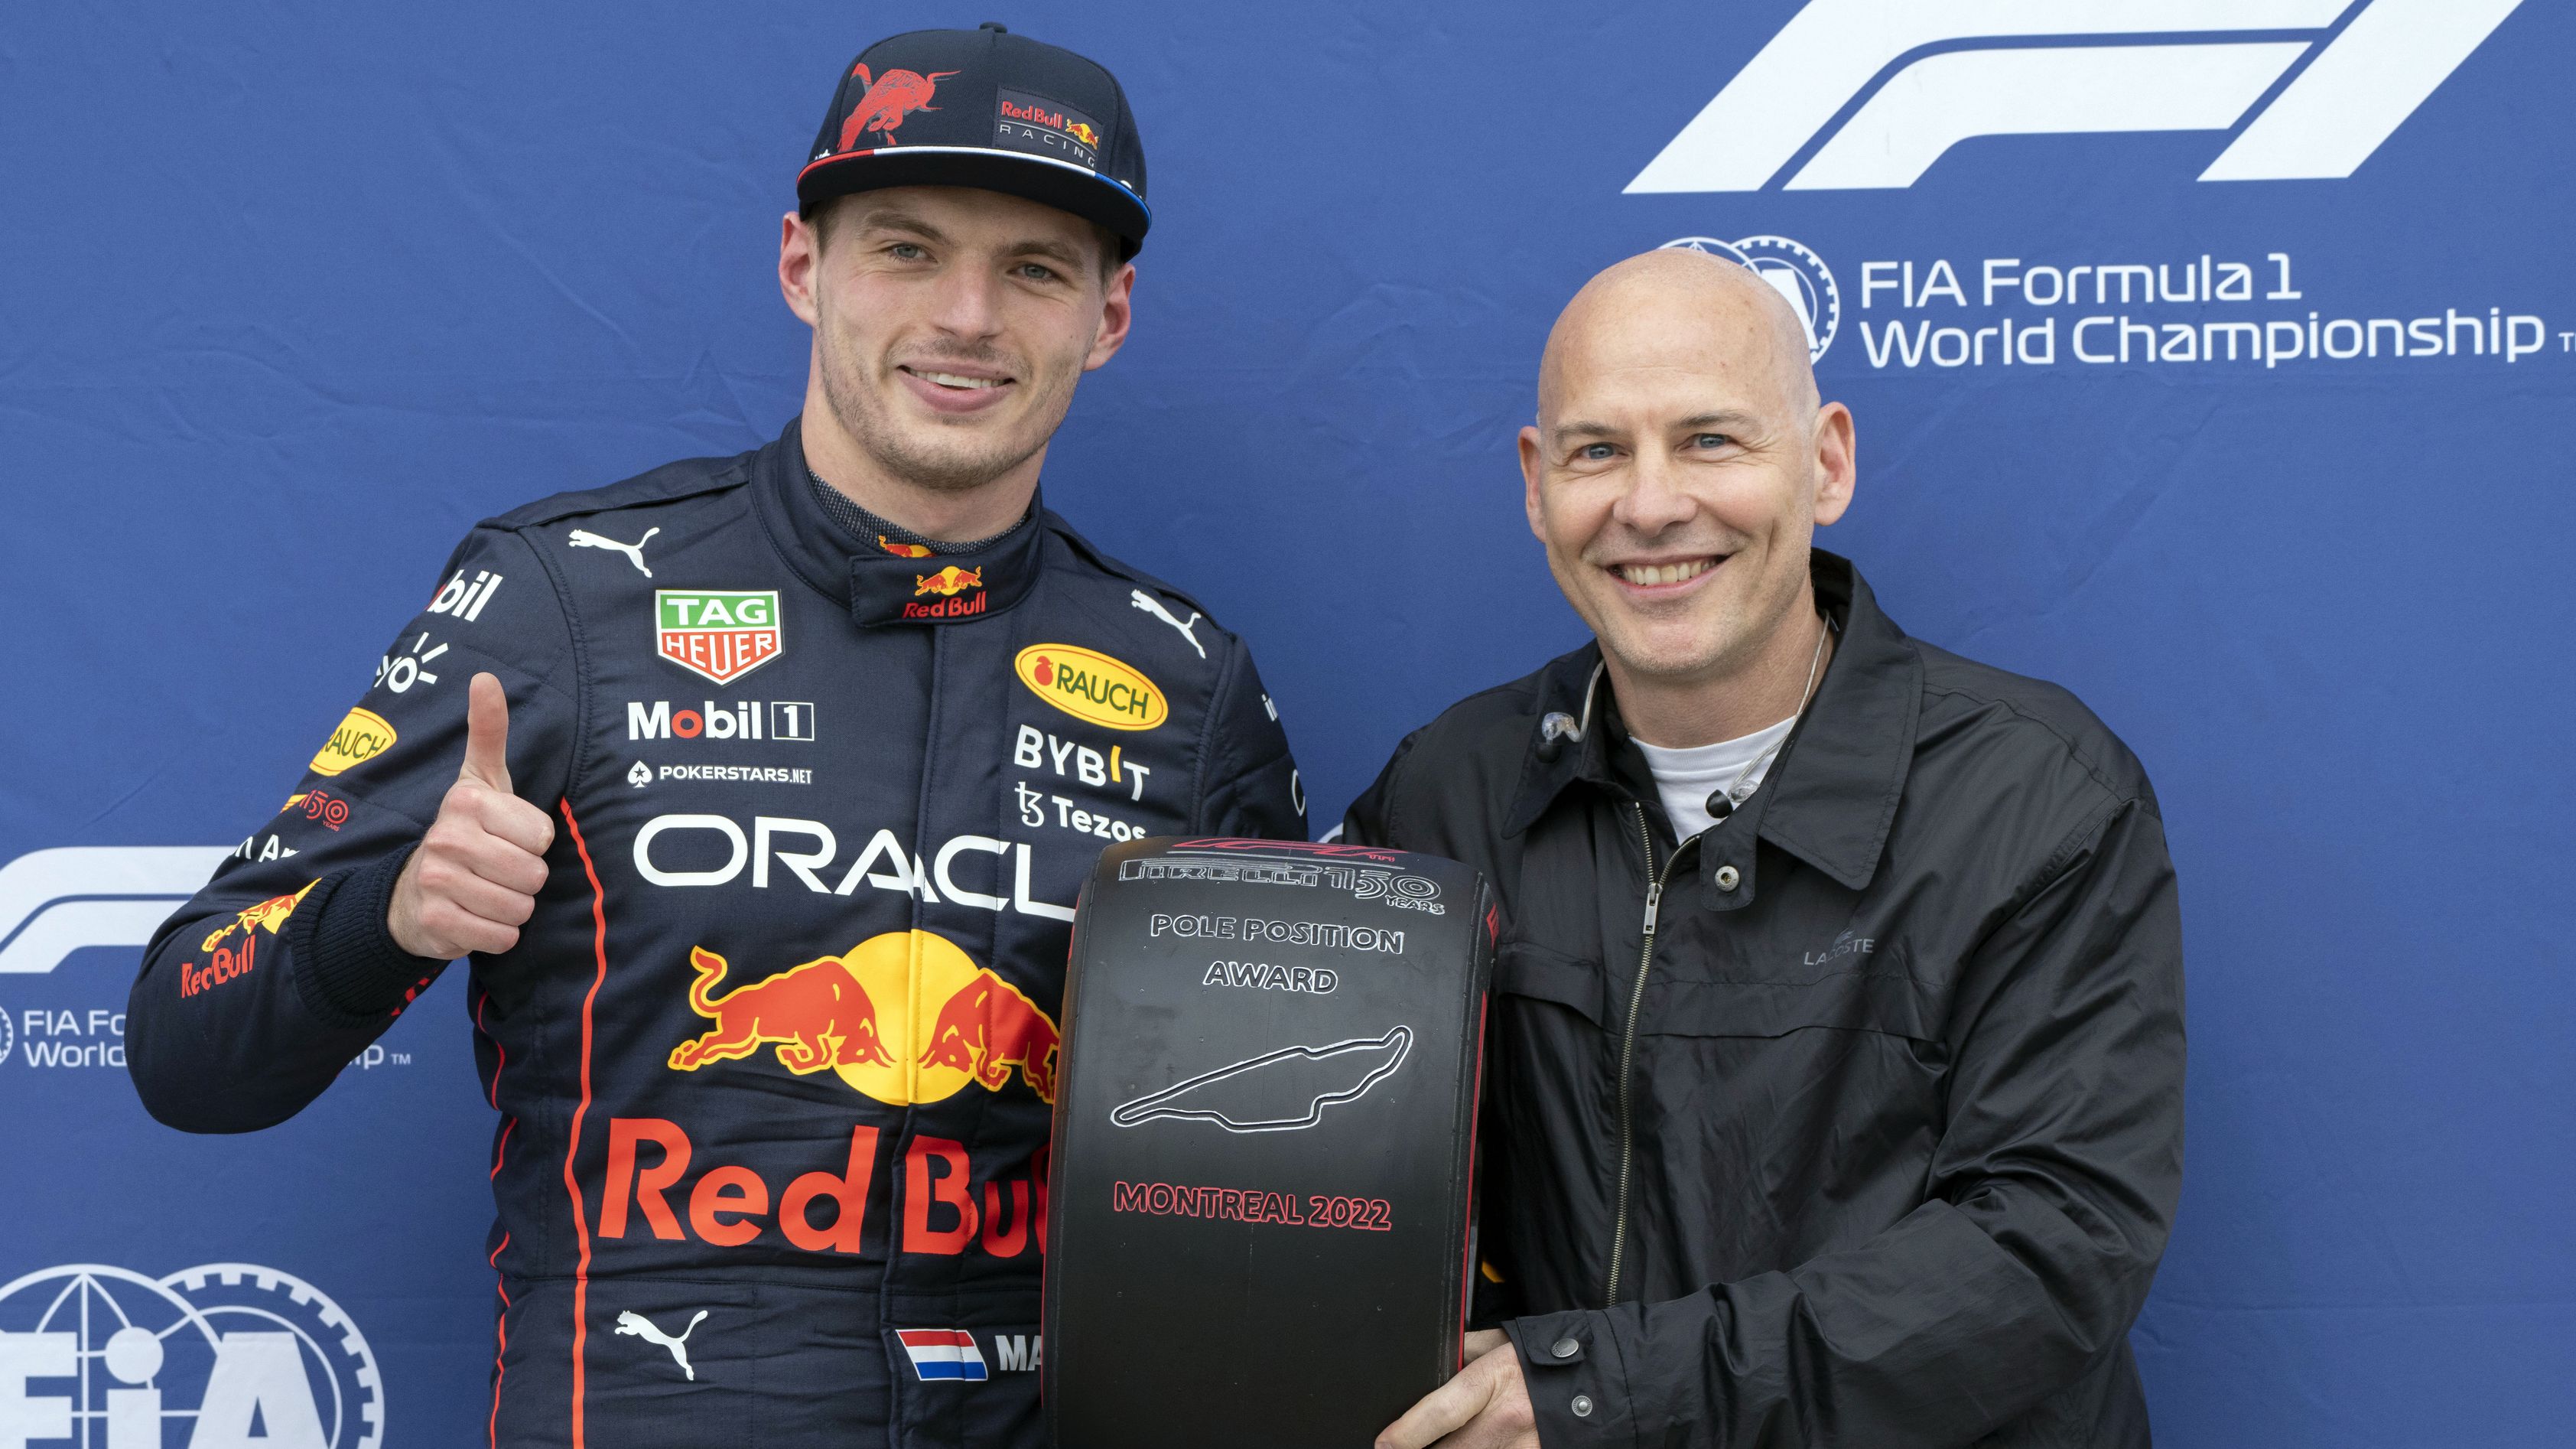 Jacques Villeneuve (right) presents Max Verstappen with the pole position award at the 2022 Canadian Grand Prix.